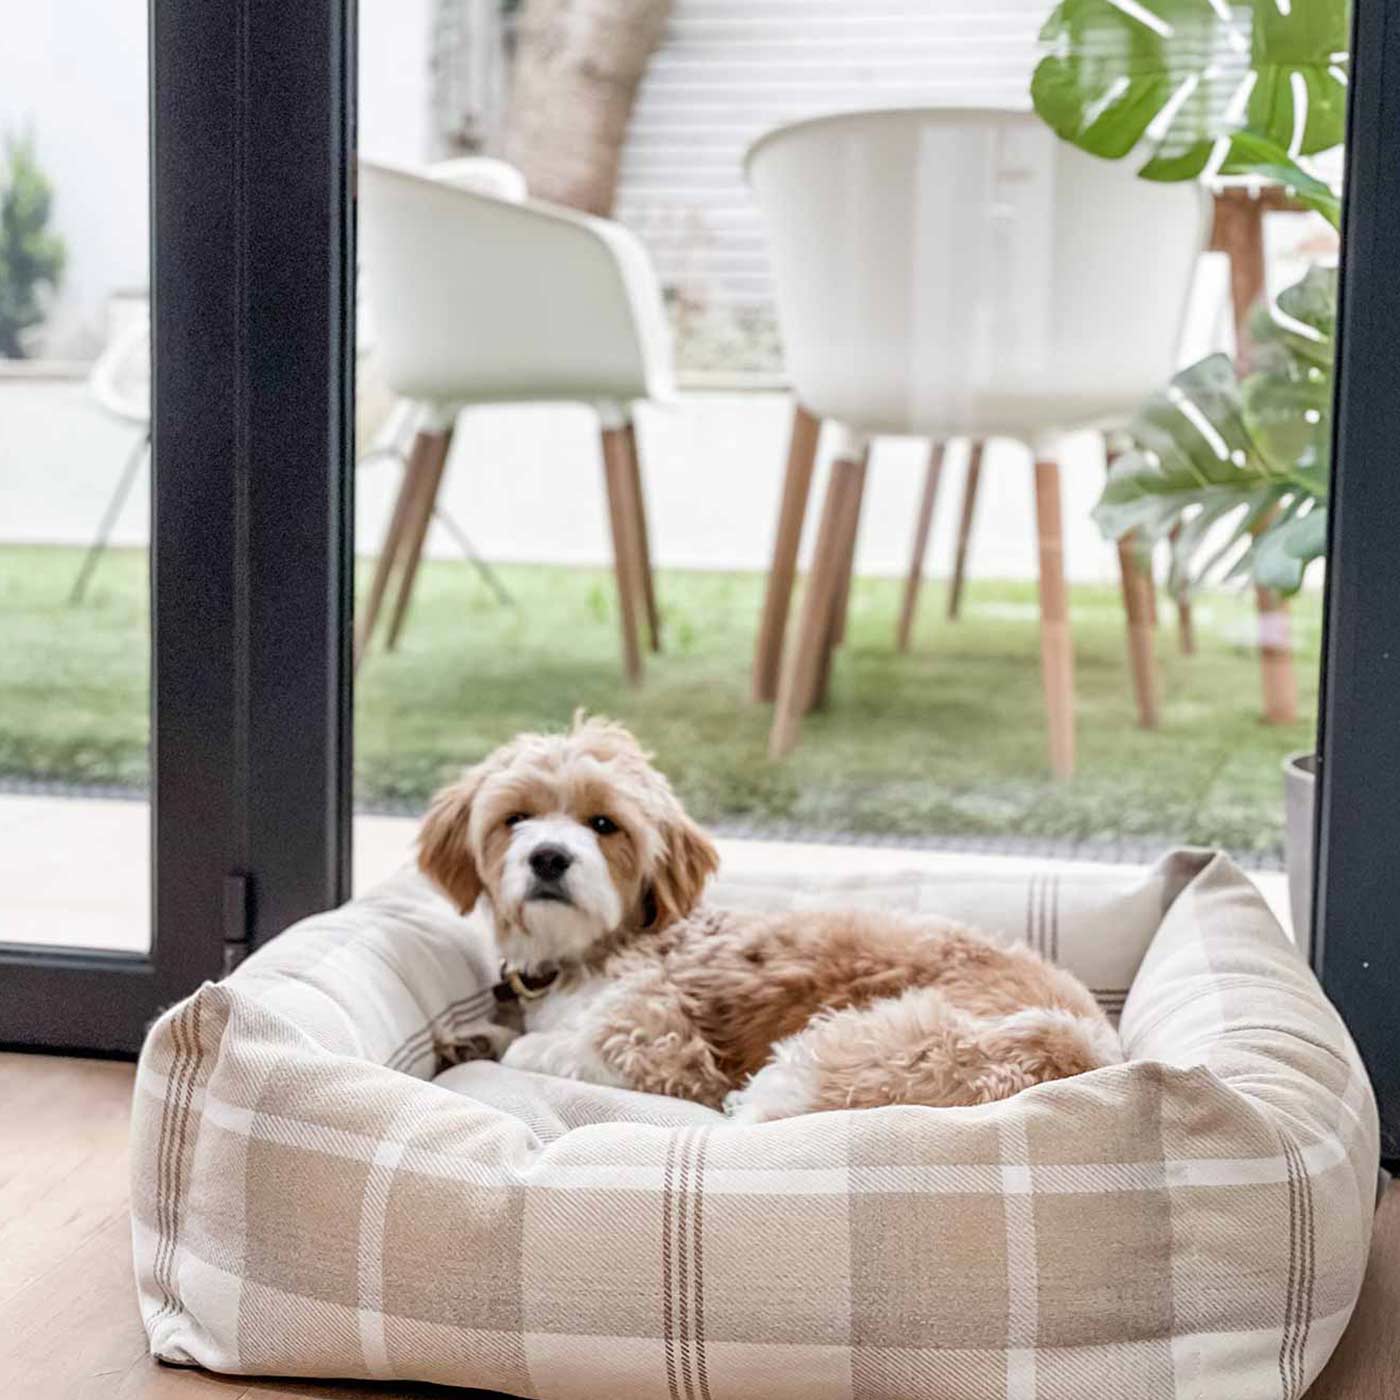 [color:natural tweed] Luxury Handmade Box Bed For Dogs in Balmoral Natural Tweed, Perfect For Your Pets Nap Time! Available To Personalize at Lords & Labradors US